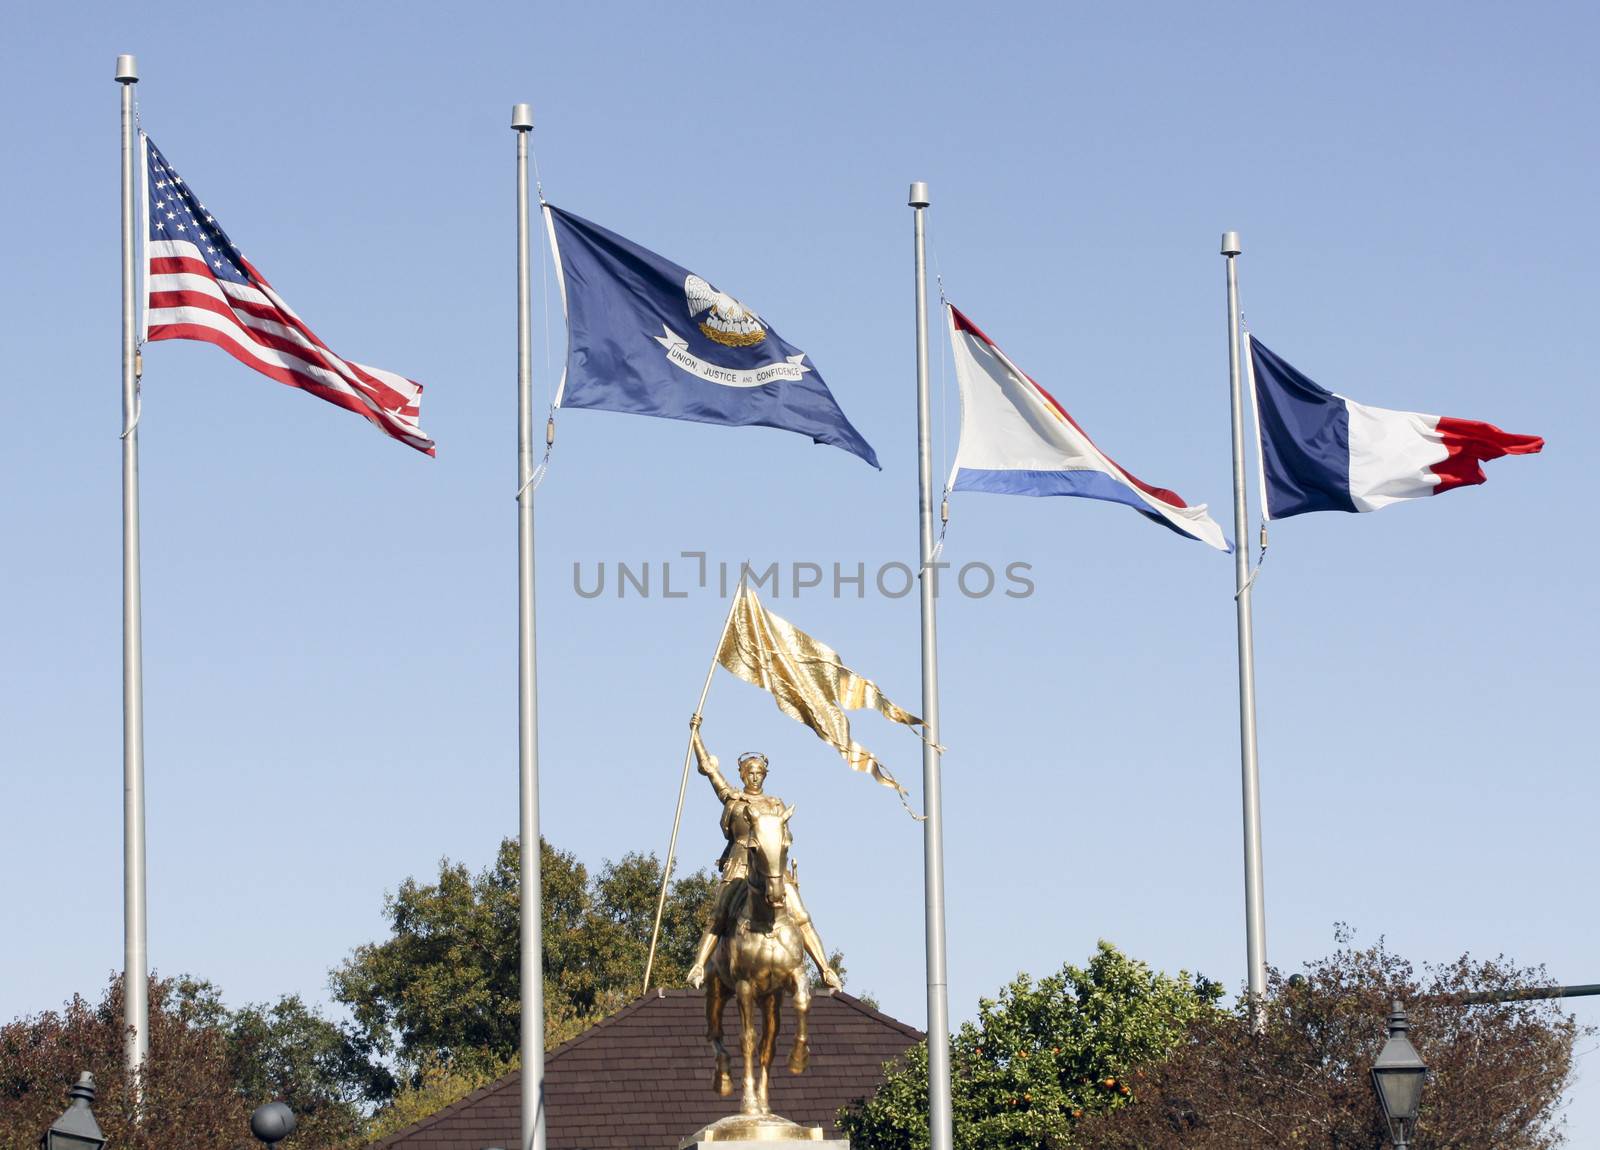 Landscape of Joan of Arc statue under flags on Decatur Street in New Orleans, Louisiana